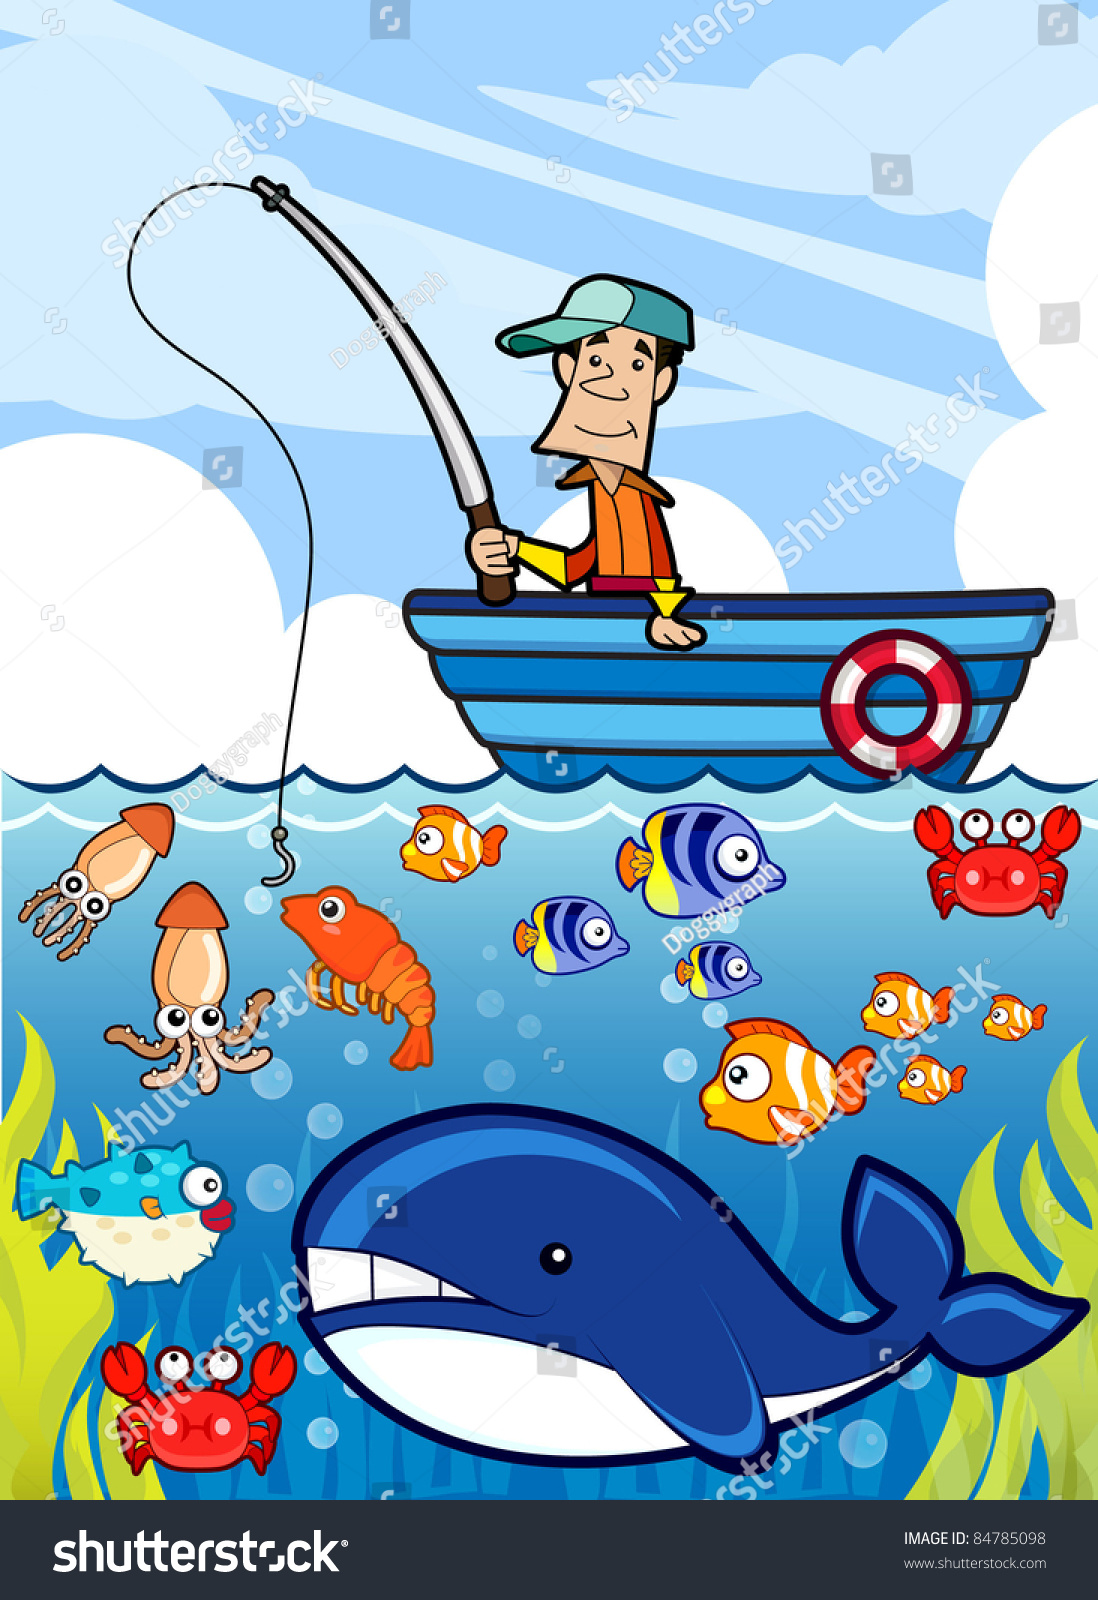 Download Fisherman Catching Fishvector Illustration Isolated Objects Stock Vector 84785098 - Shutterstock